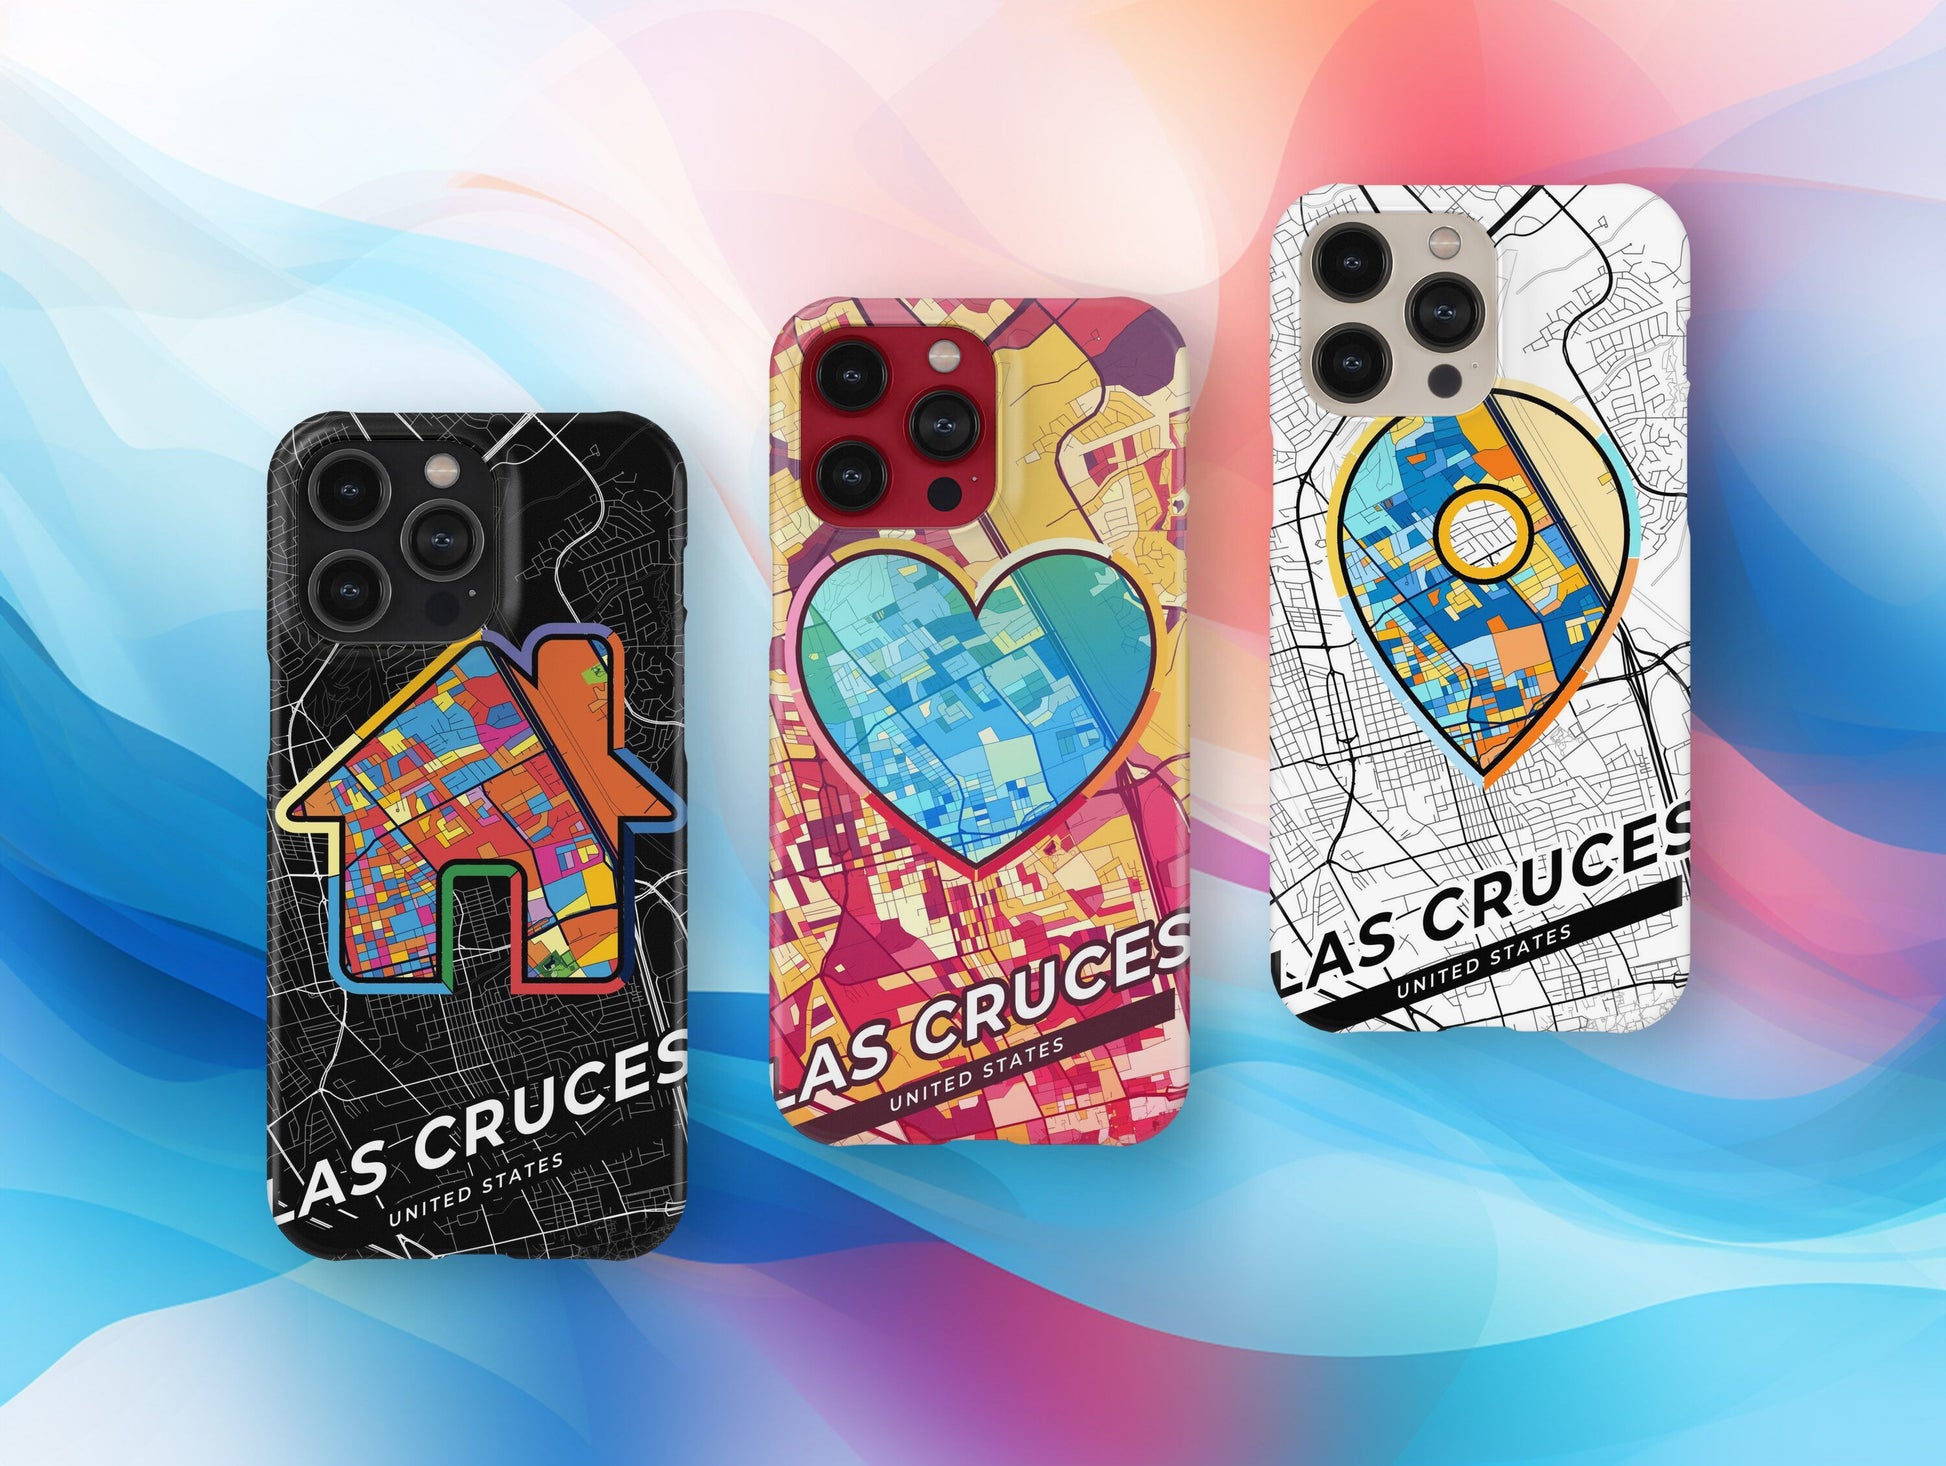 Las Cruces New Mexico slim phone case with colorful icon. Birthday, wedding or housewarming gift. Couple match cases.